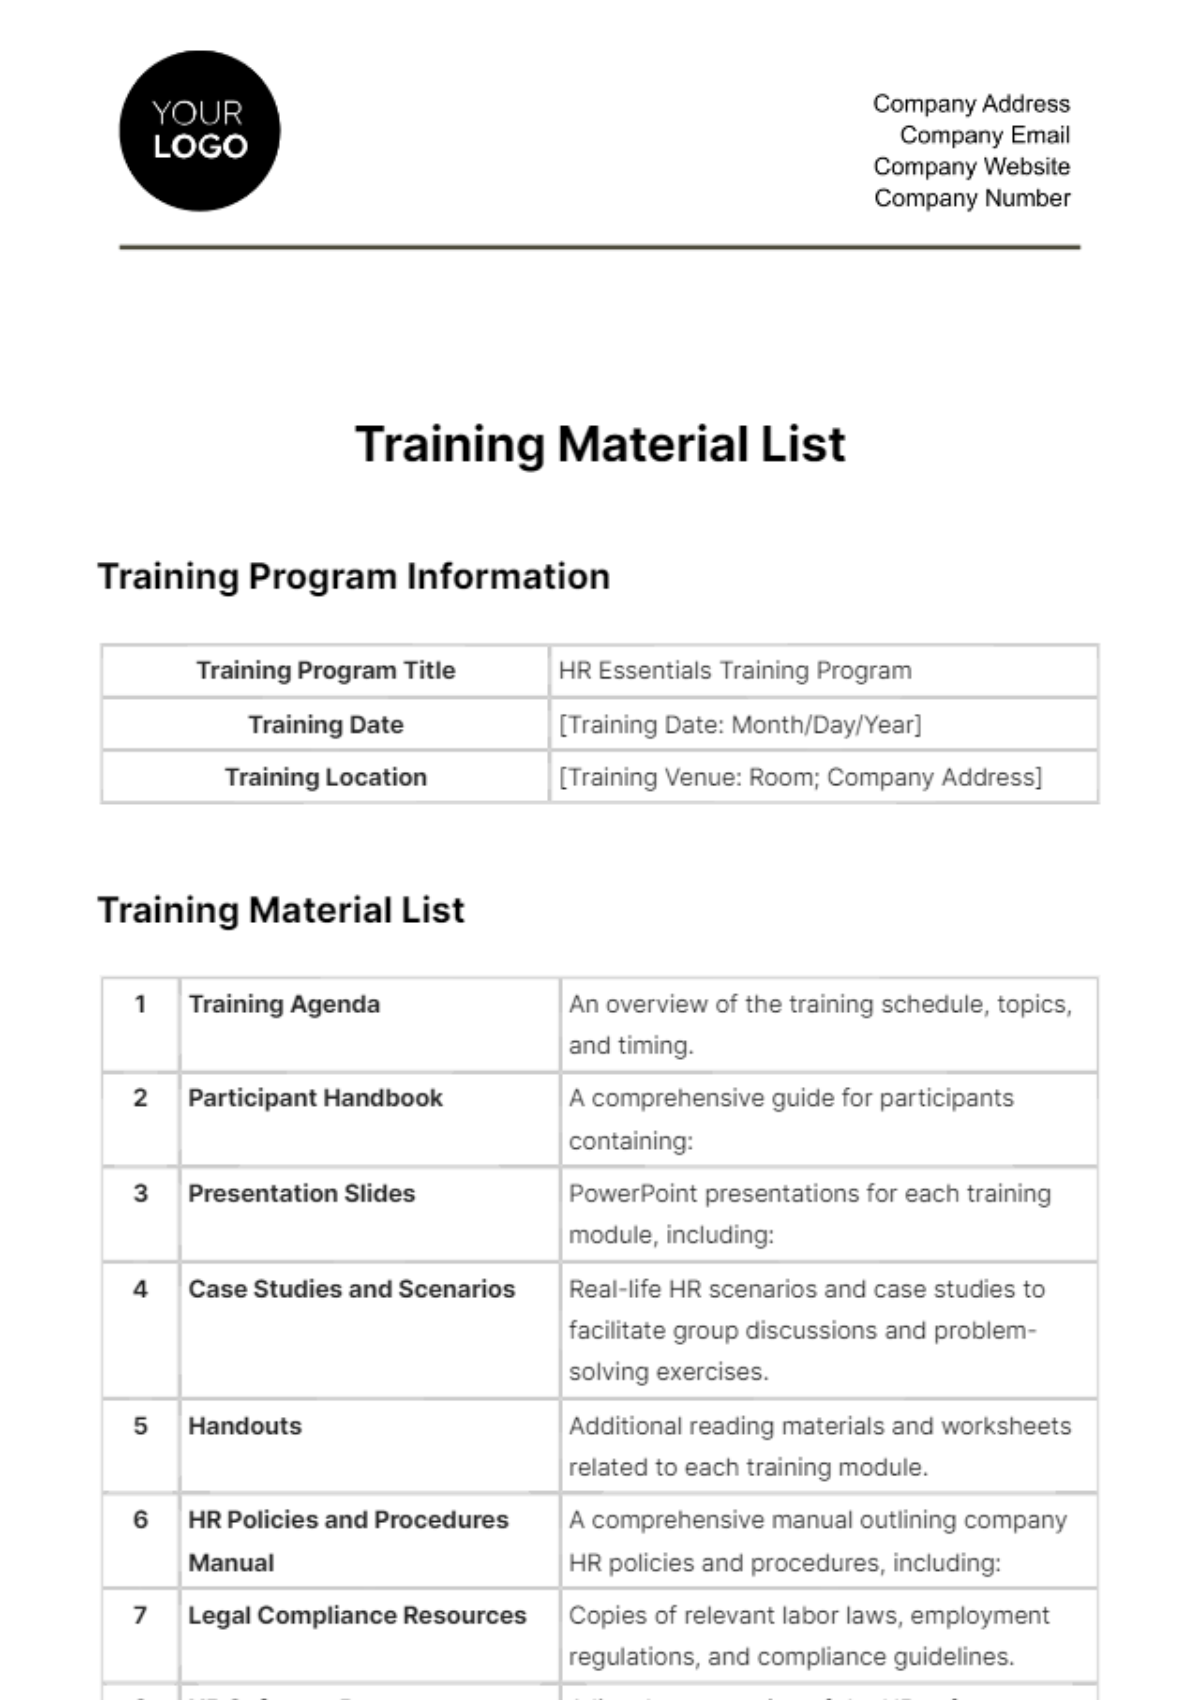 Free Training Material List HR Template